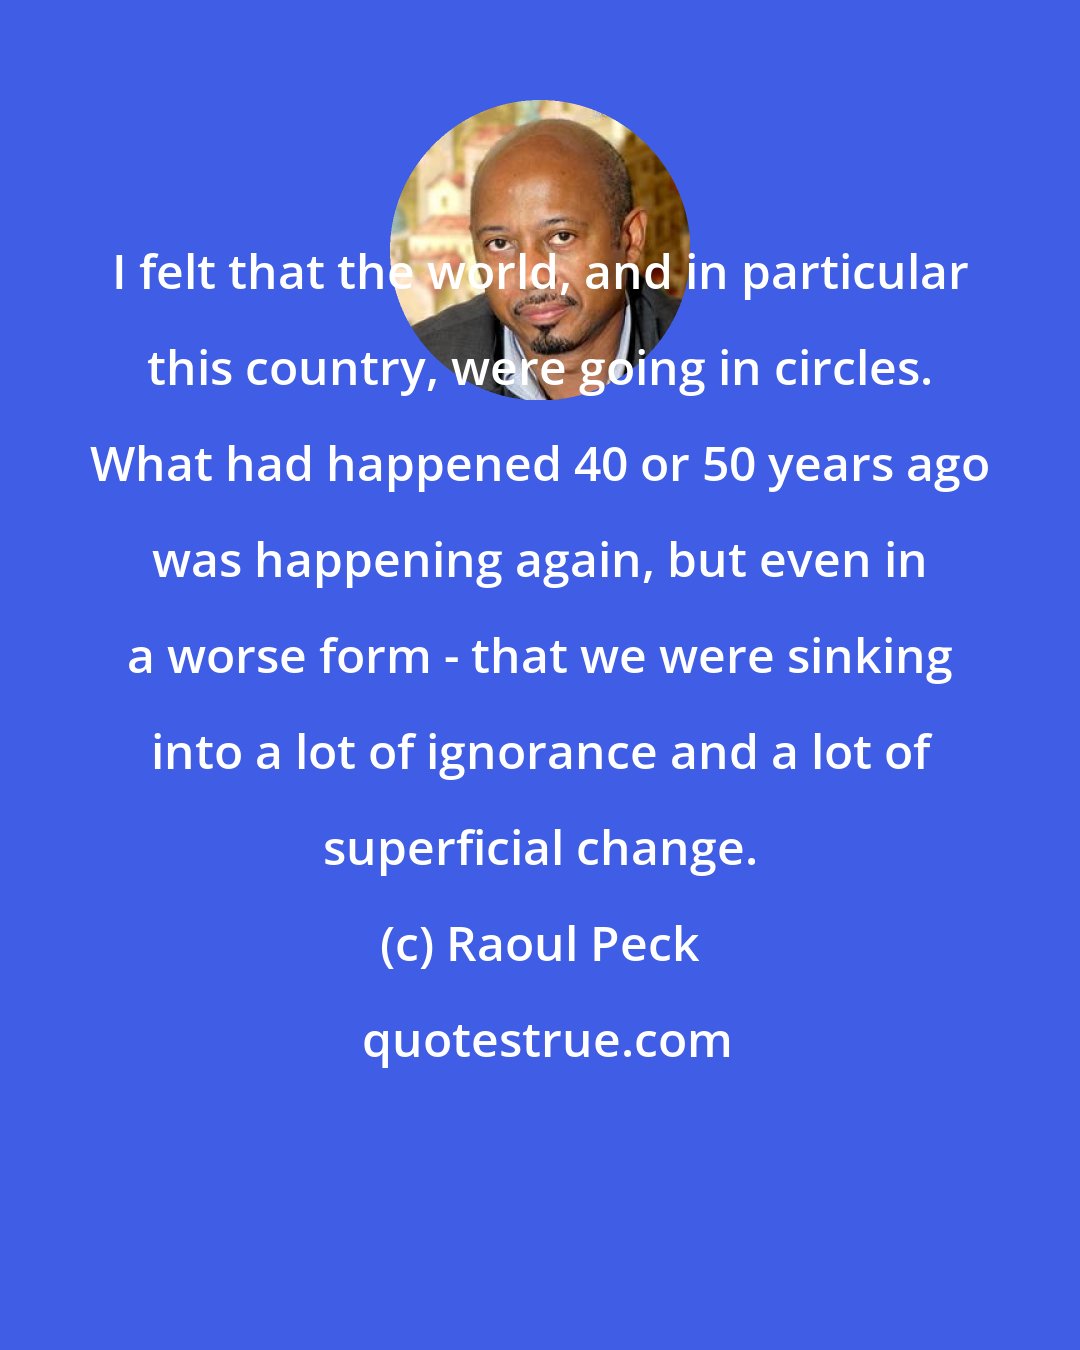 Raoul Peck: I felt that the world, and in particular this country, were going in circles. What had happened 40 or 50 years ago was happening again, but even in a worse form - that we were sinking into a lot of ignorance and a lot of superficial change.